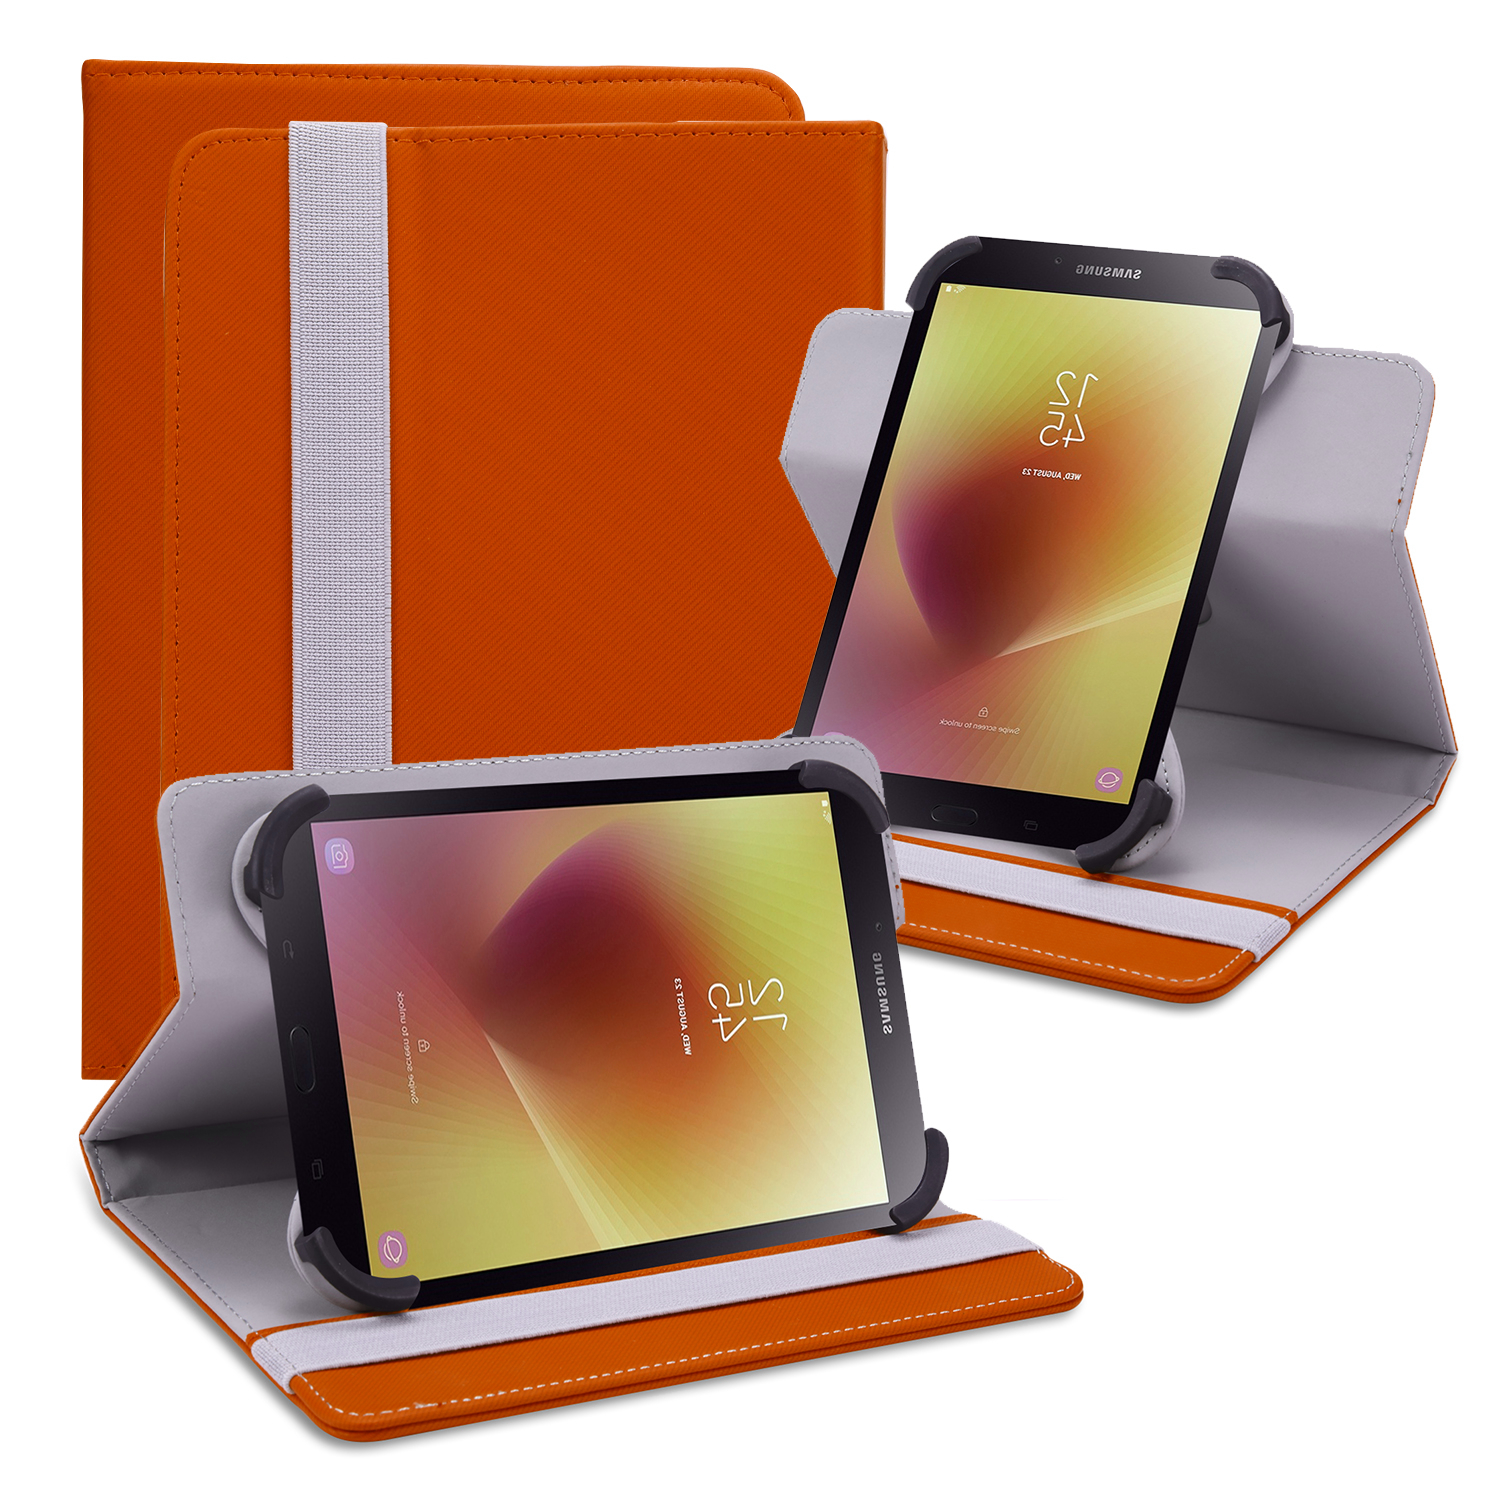 Universal Protective LEATHER Cover Case for Universal 9 Inch Tablets (Orange)